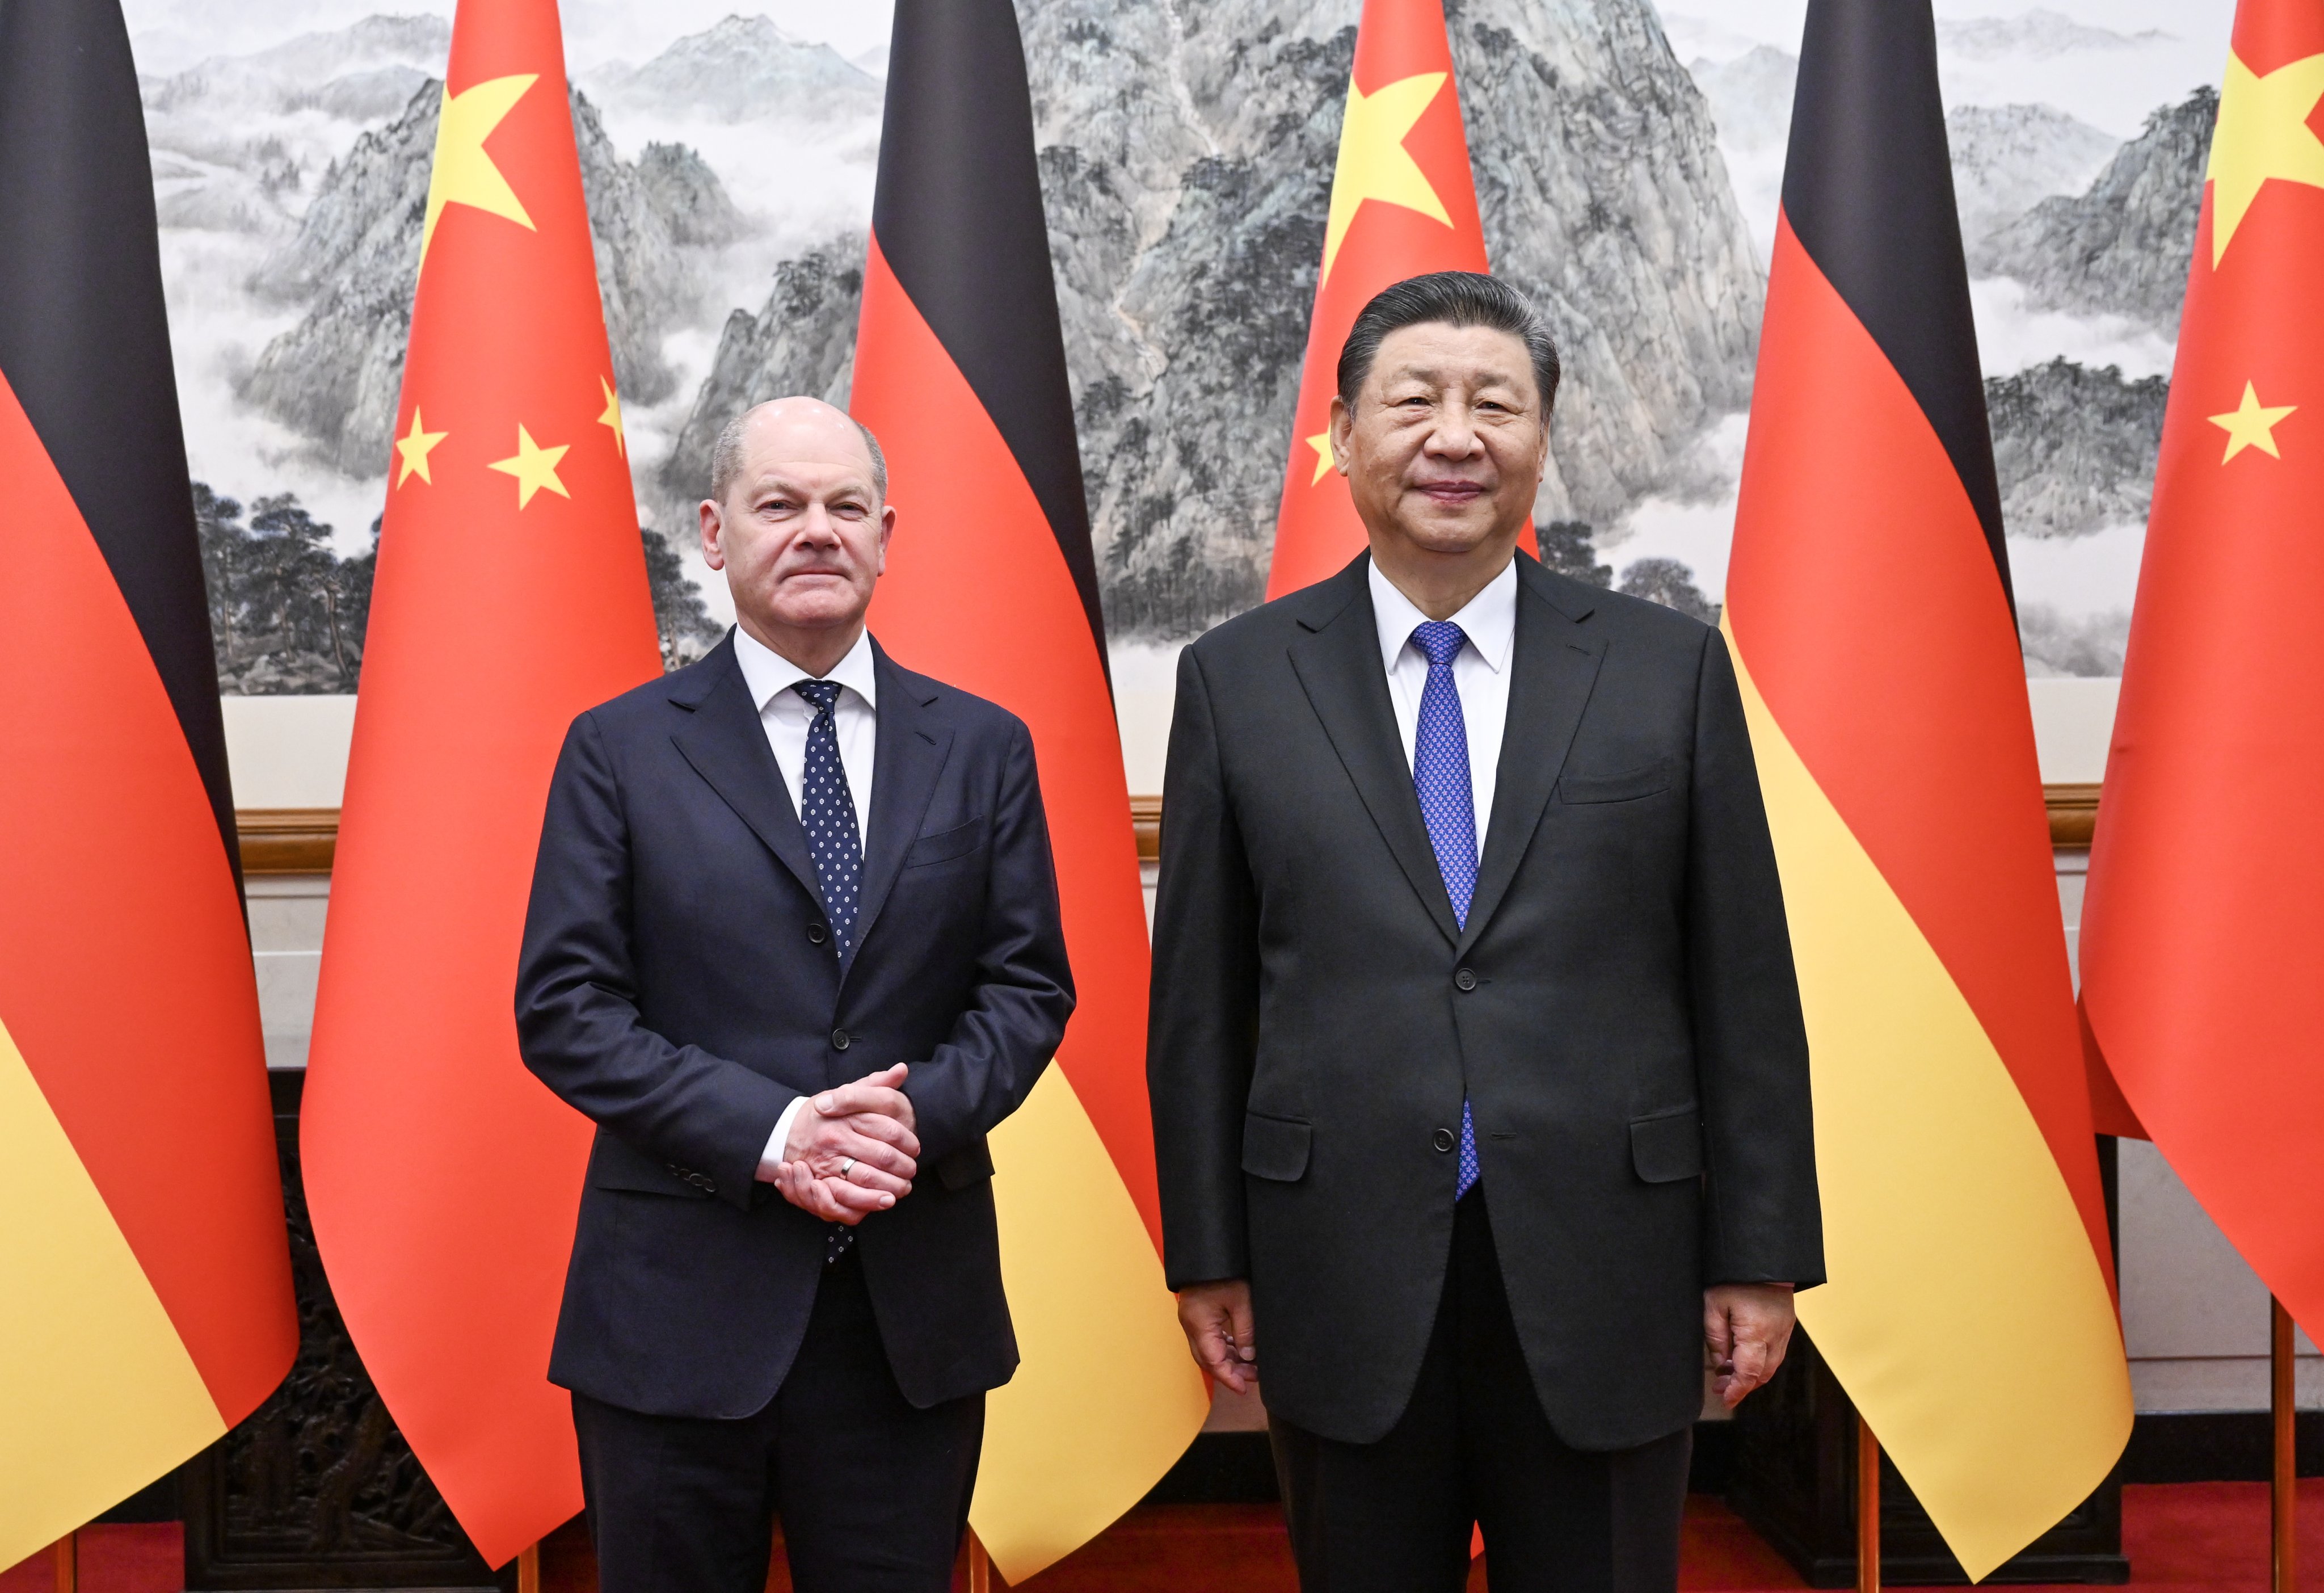 Chinese President Xi Jinping meets German Chancellor Olaf Scholz at the Diaoyutai State Guesthouse in Beijing on Tuesday. Photo: Xinhua/EPA-EFE